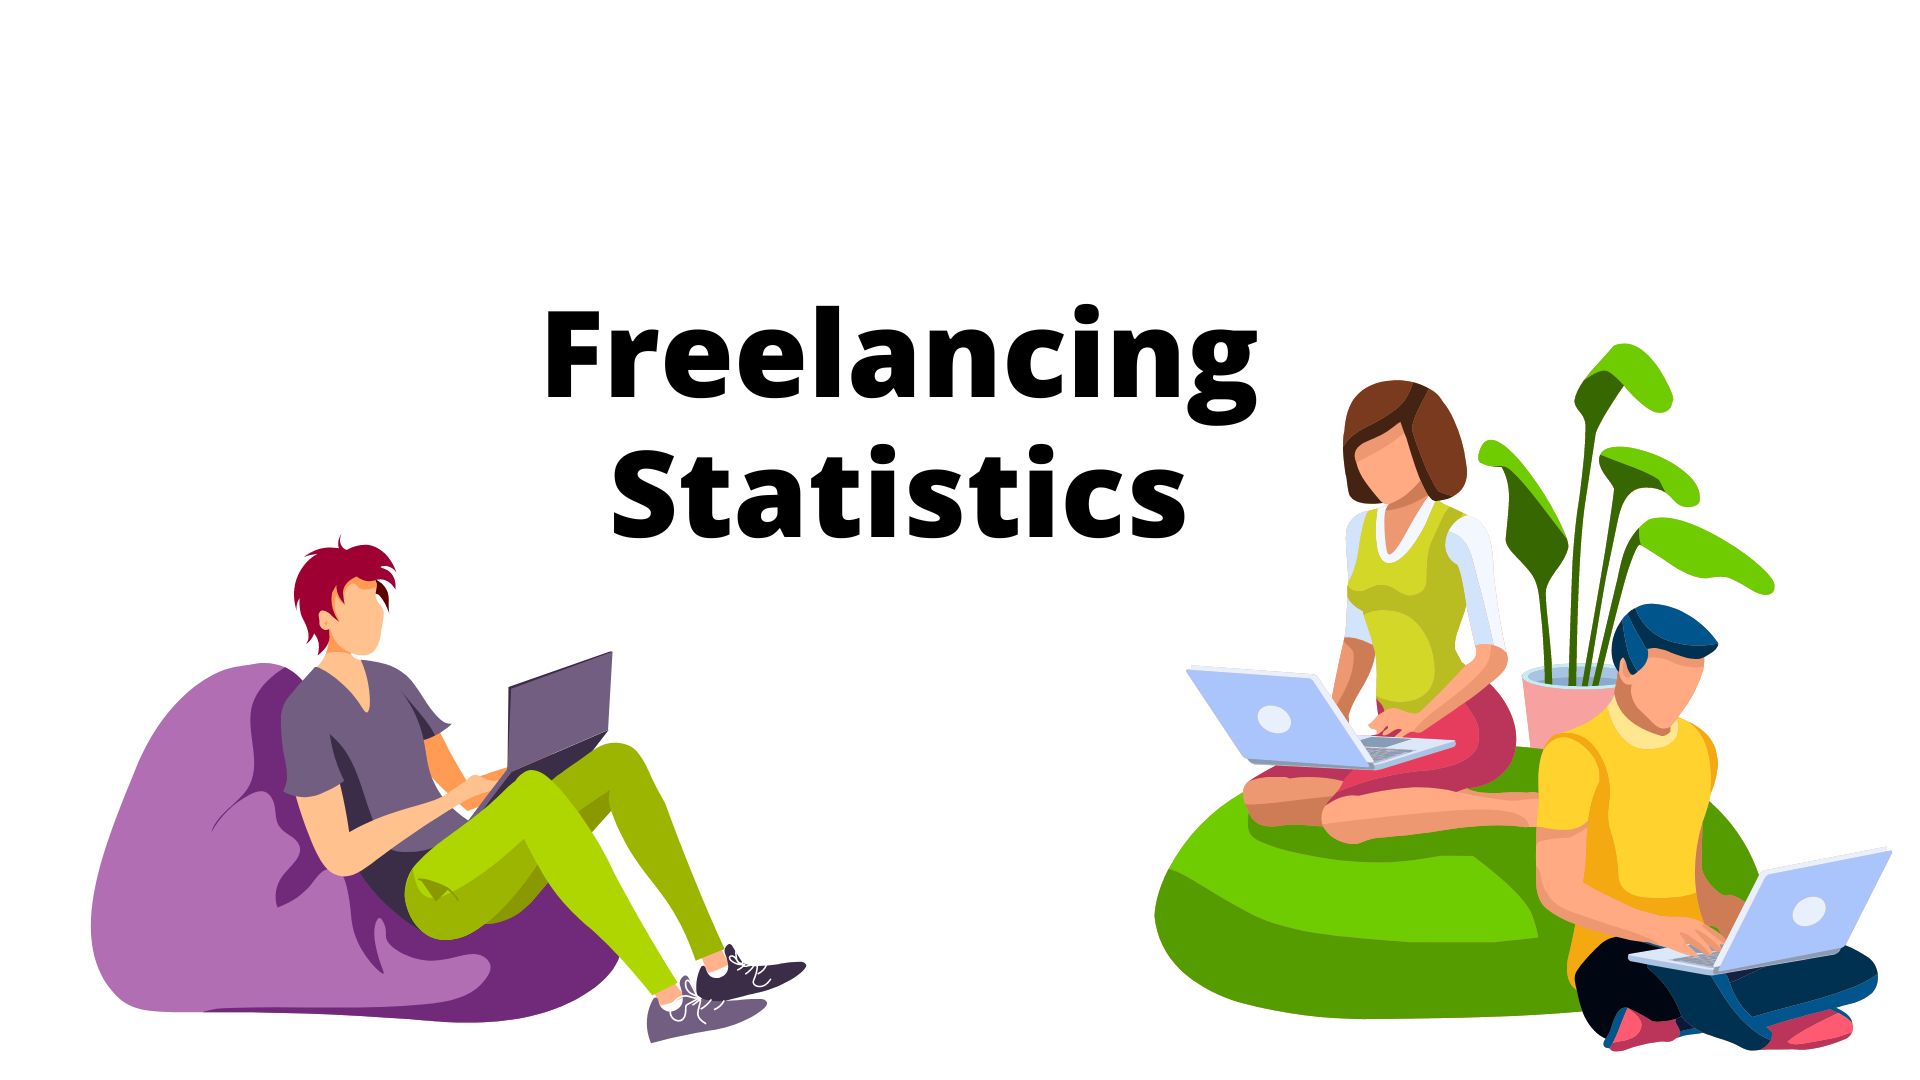 Freelancing Statistics – By Wages, Demographic, Market Share, Earning, Trends